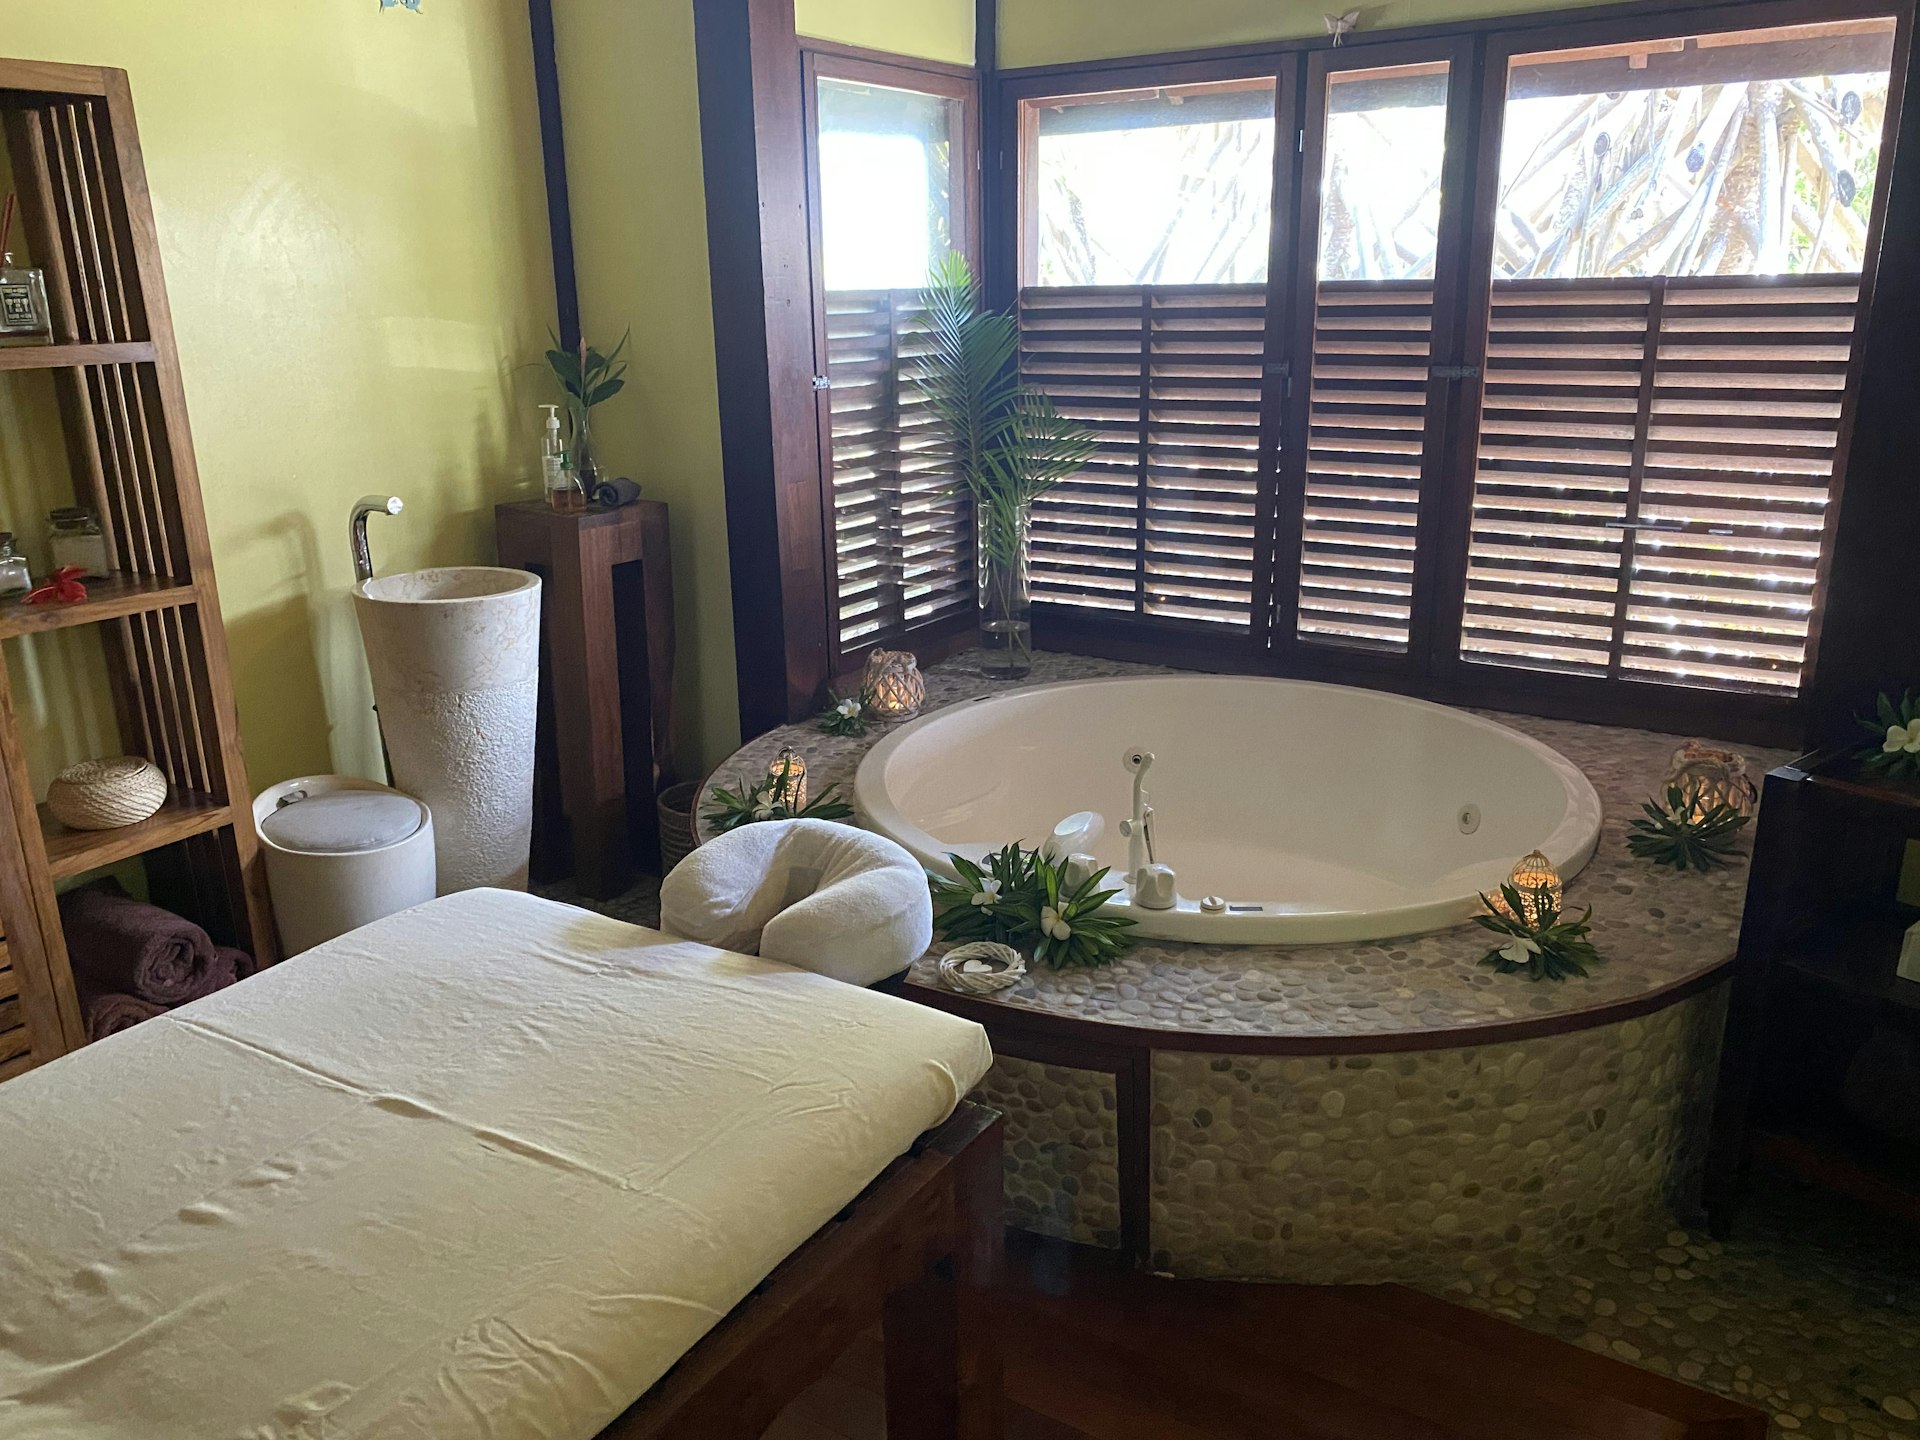 A treatment room at the Le Jardin Spa and Beauty